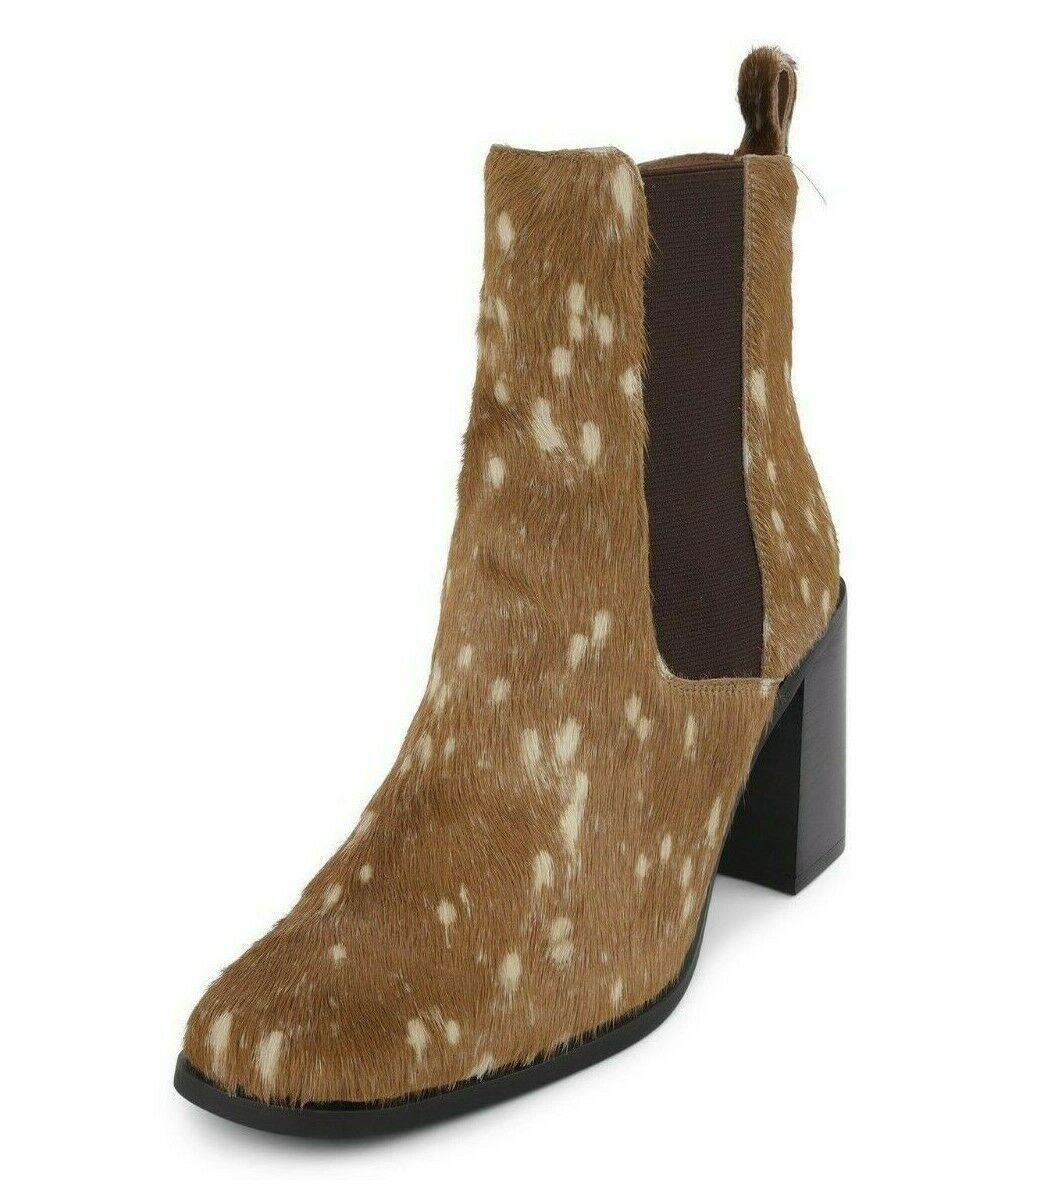 JEFFREY CAMPBELL Ricardo Ankle Boot Spotted Brown Calf Hair Size US 8.5 - SVNYFancy